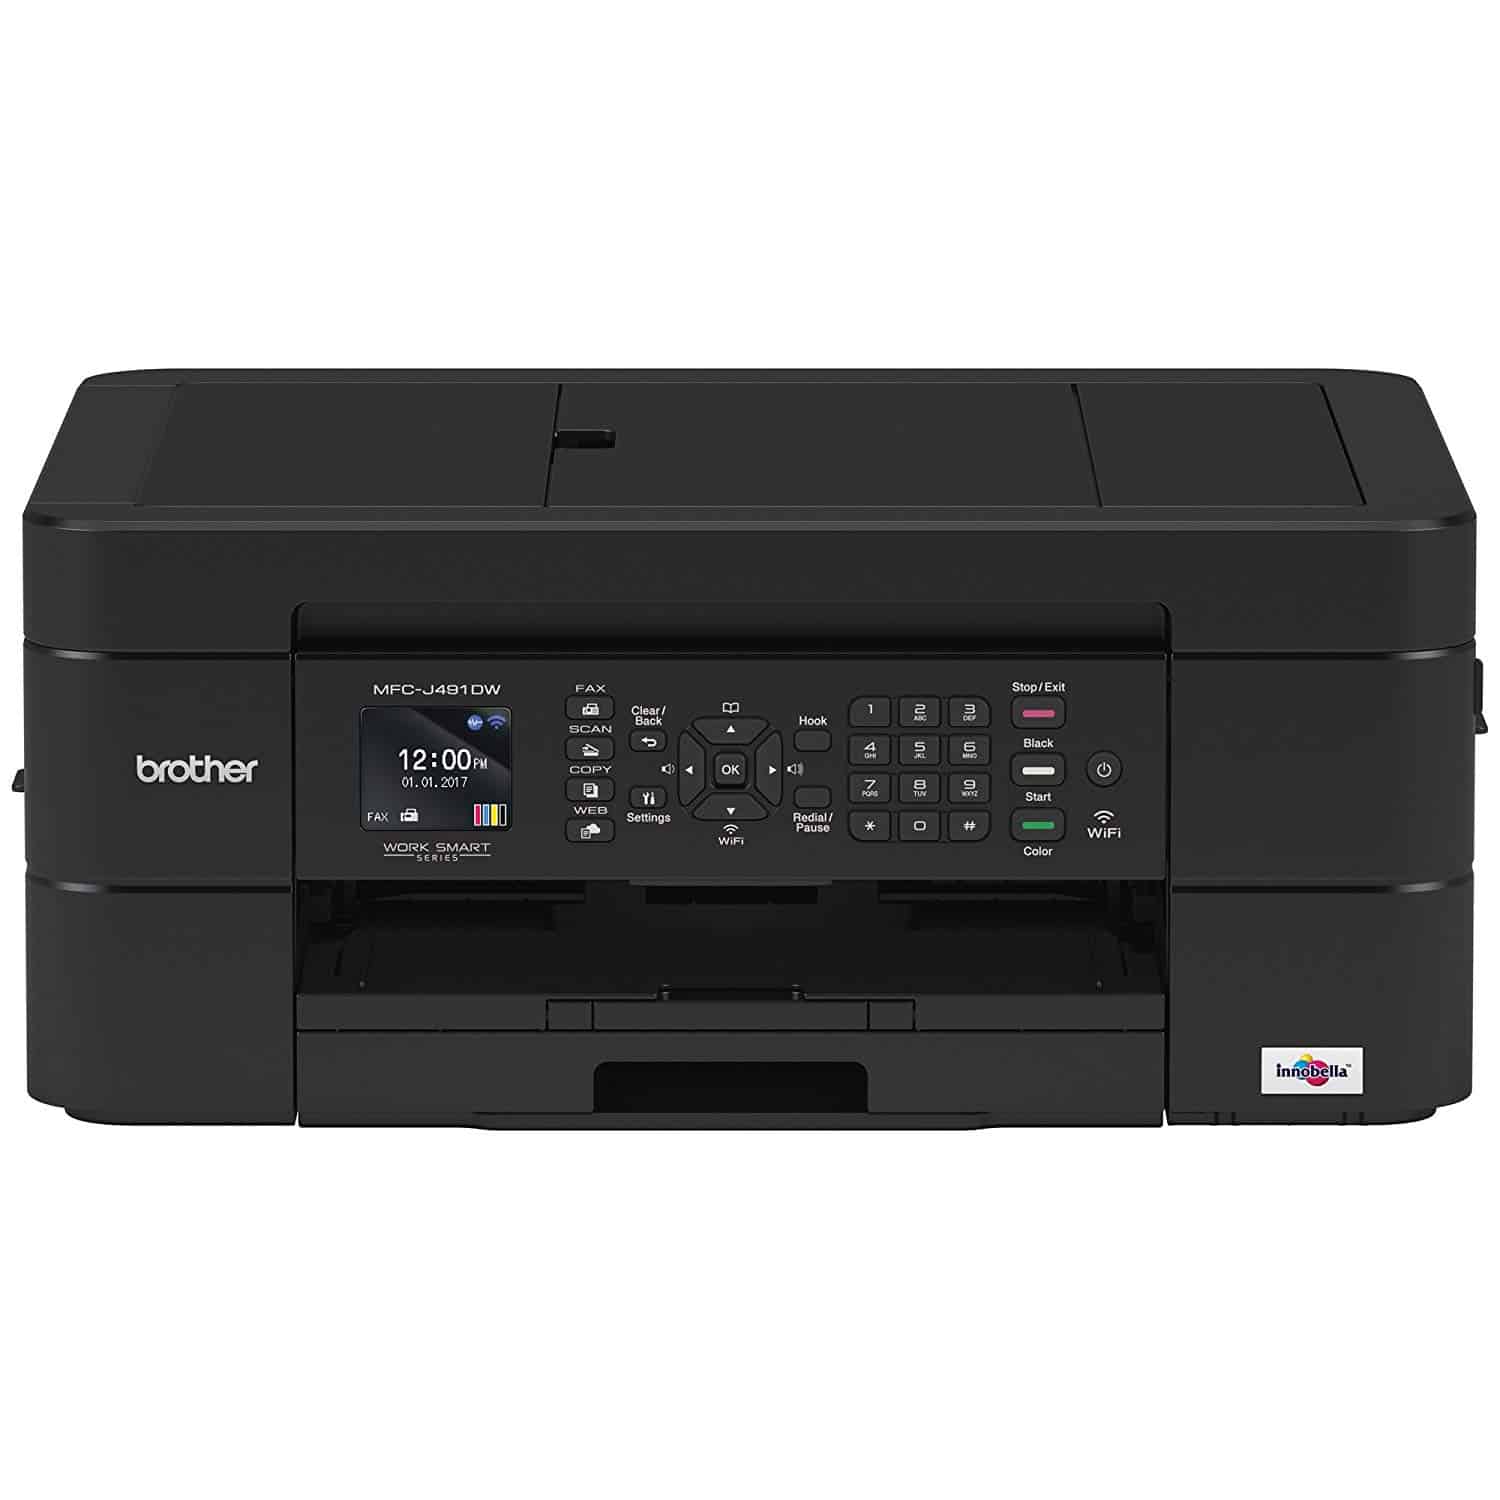 DEAL ALERT: Brother Wireless All-in-One Color Printer for less than $50!